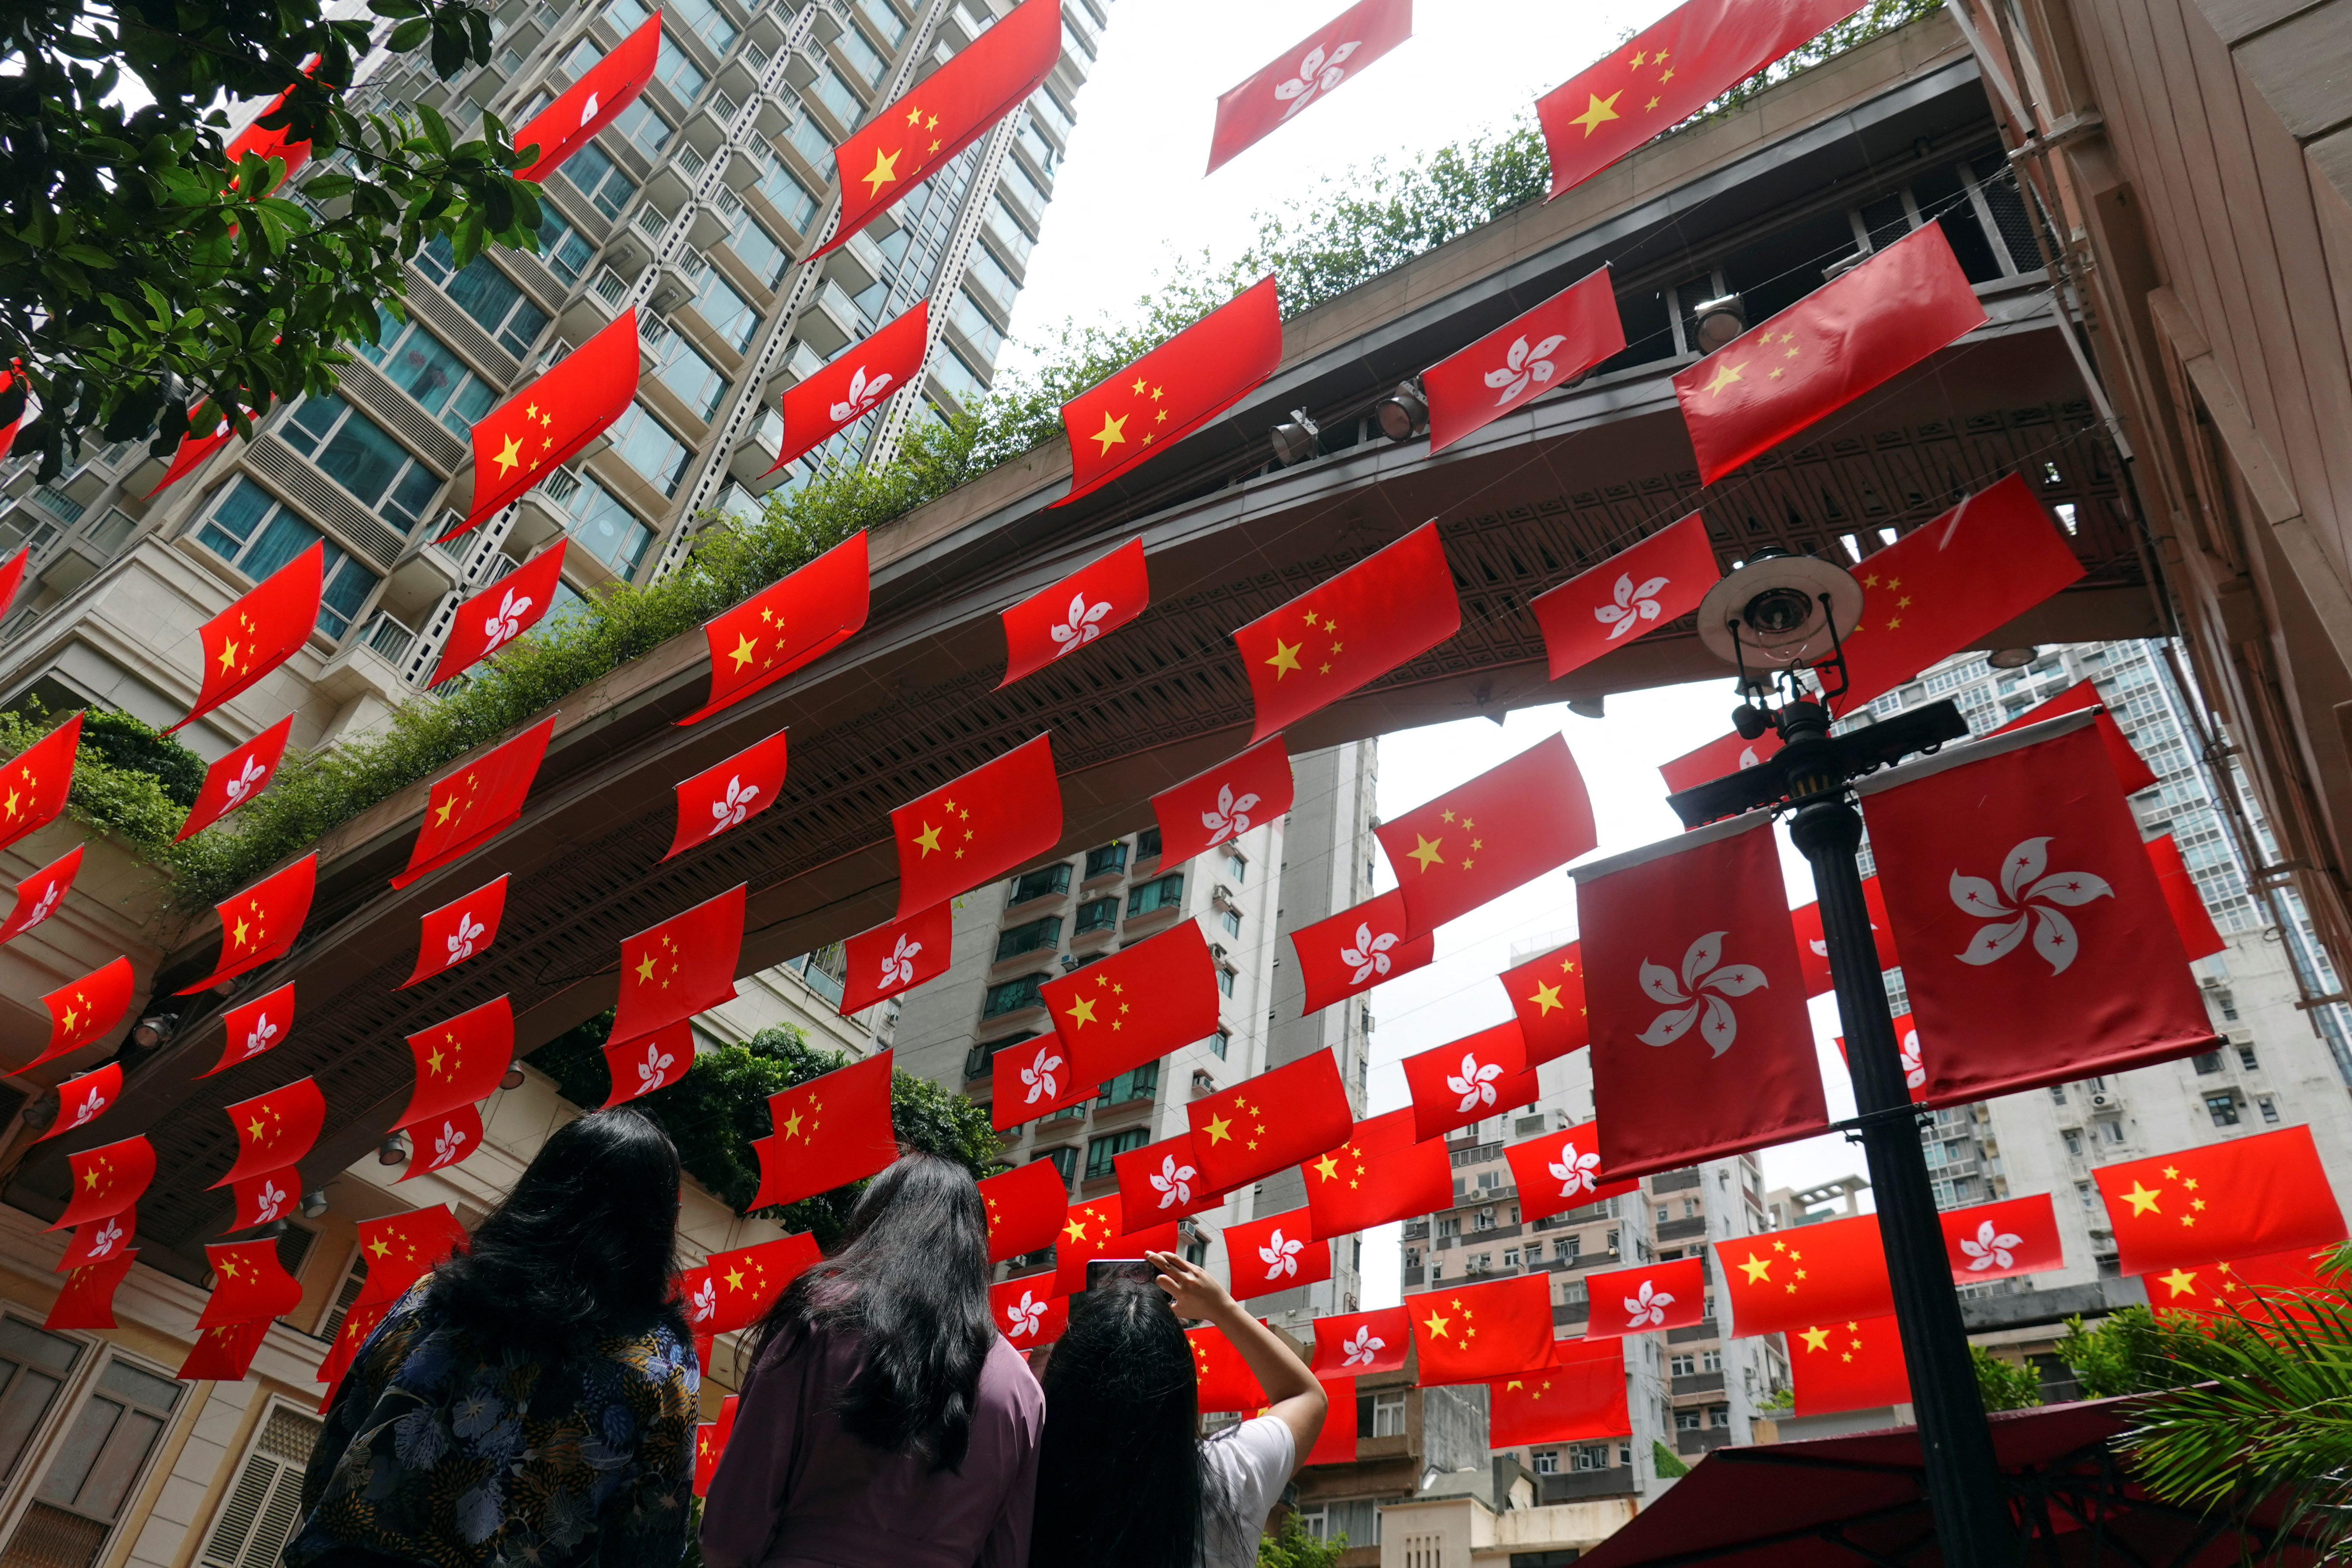 A woman takes pictures of Chinese and Hong Kong flags decorating a street, ahead of the 25th anniversary of the handover of the former British colony to Chinese rule, in Hong Kong, China, June 30, 2022 (Reuters/Joyce Chu)